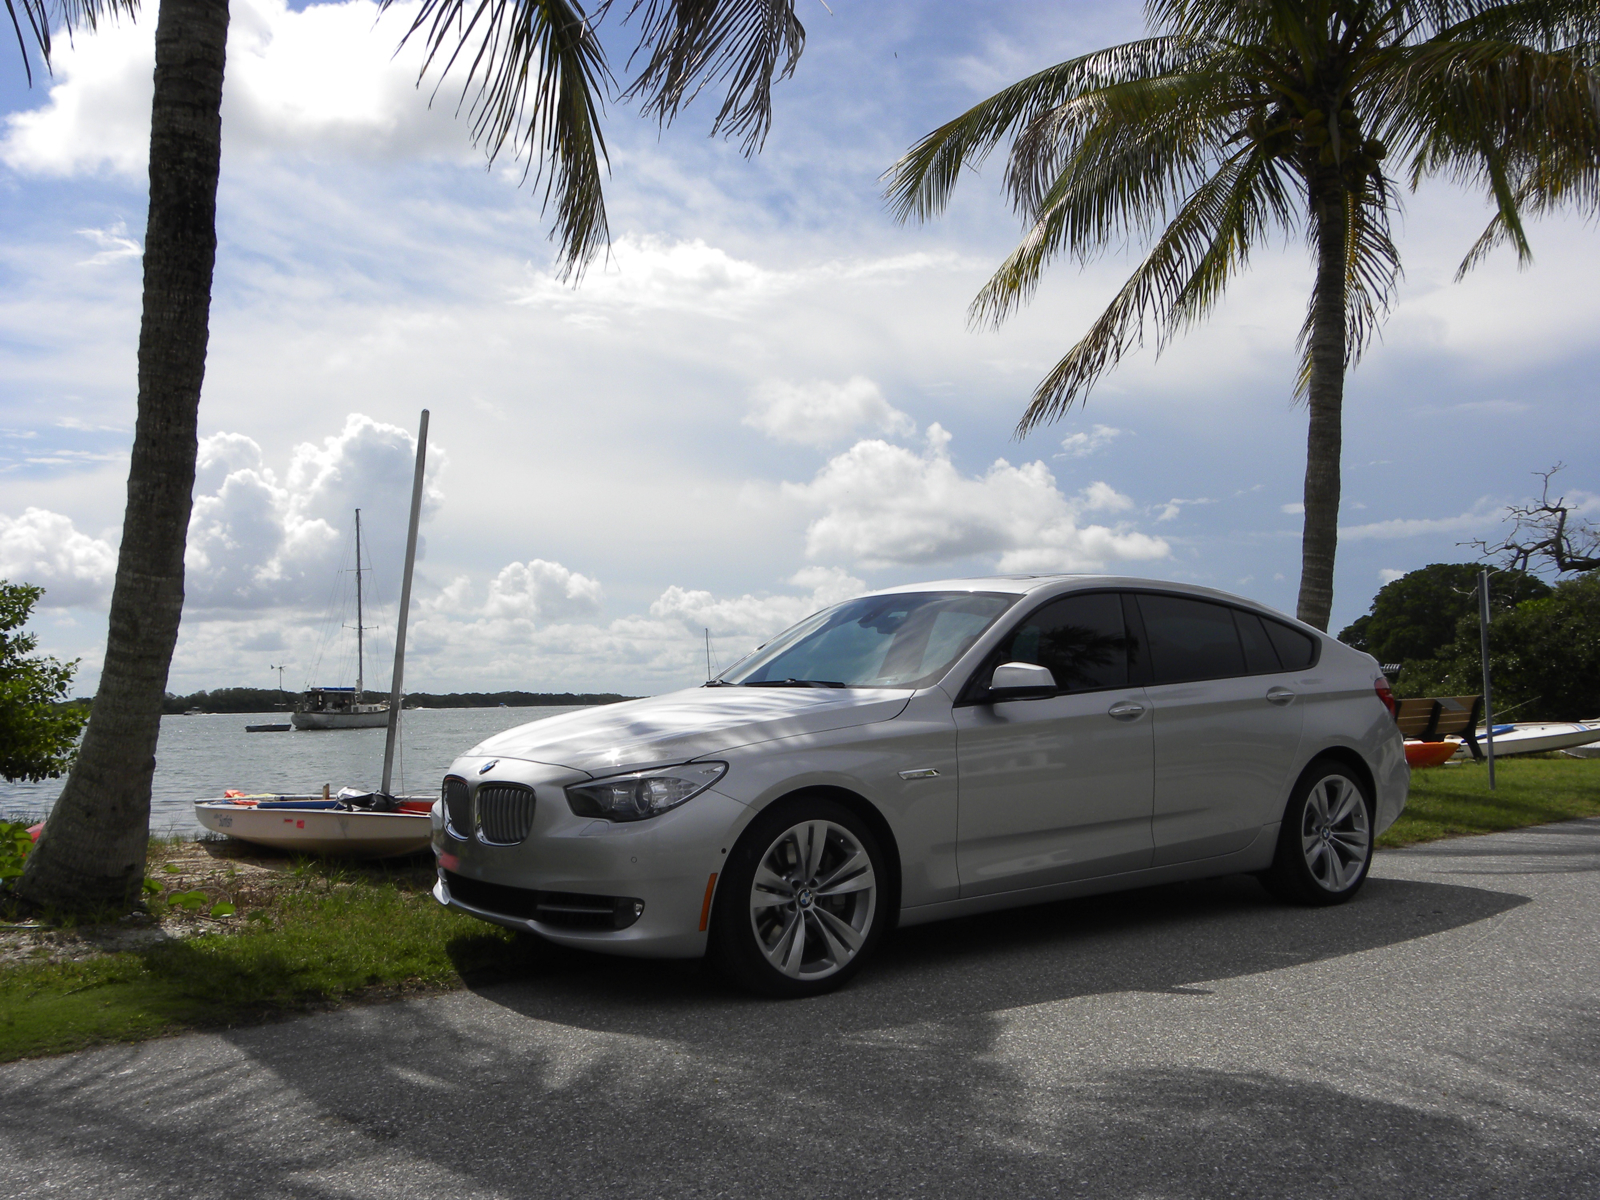 BMW 550i Gran Turismo: An Owner's Review of 4+ Years